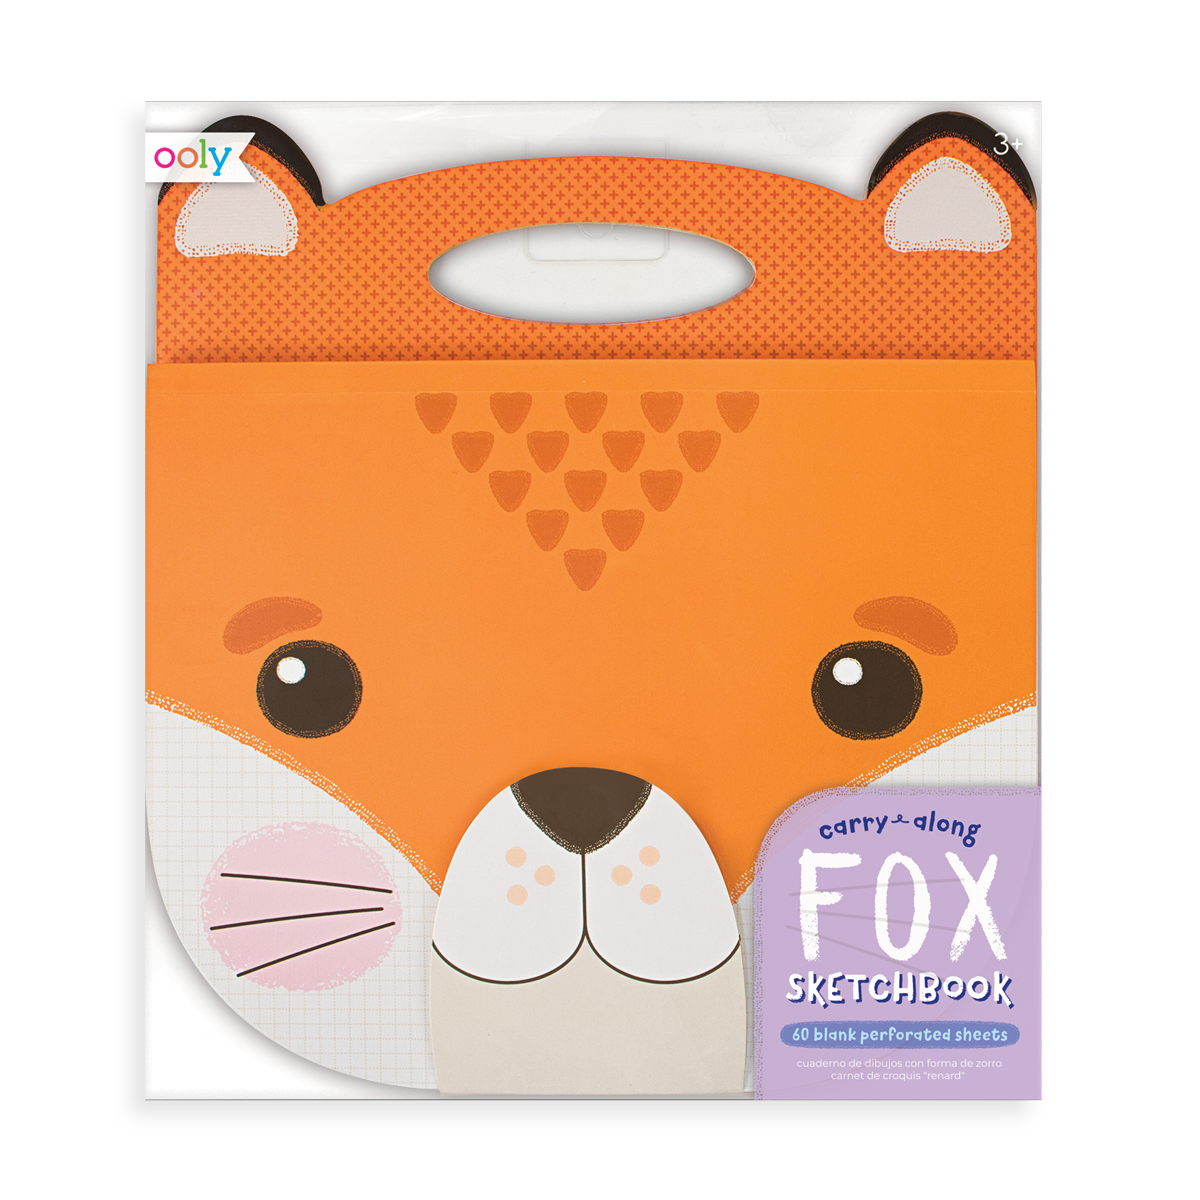 Carry along fox in packaging